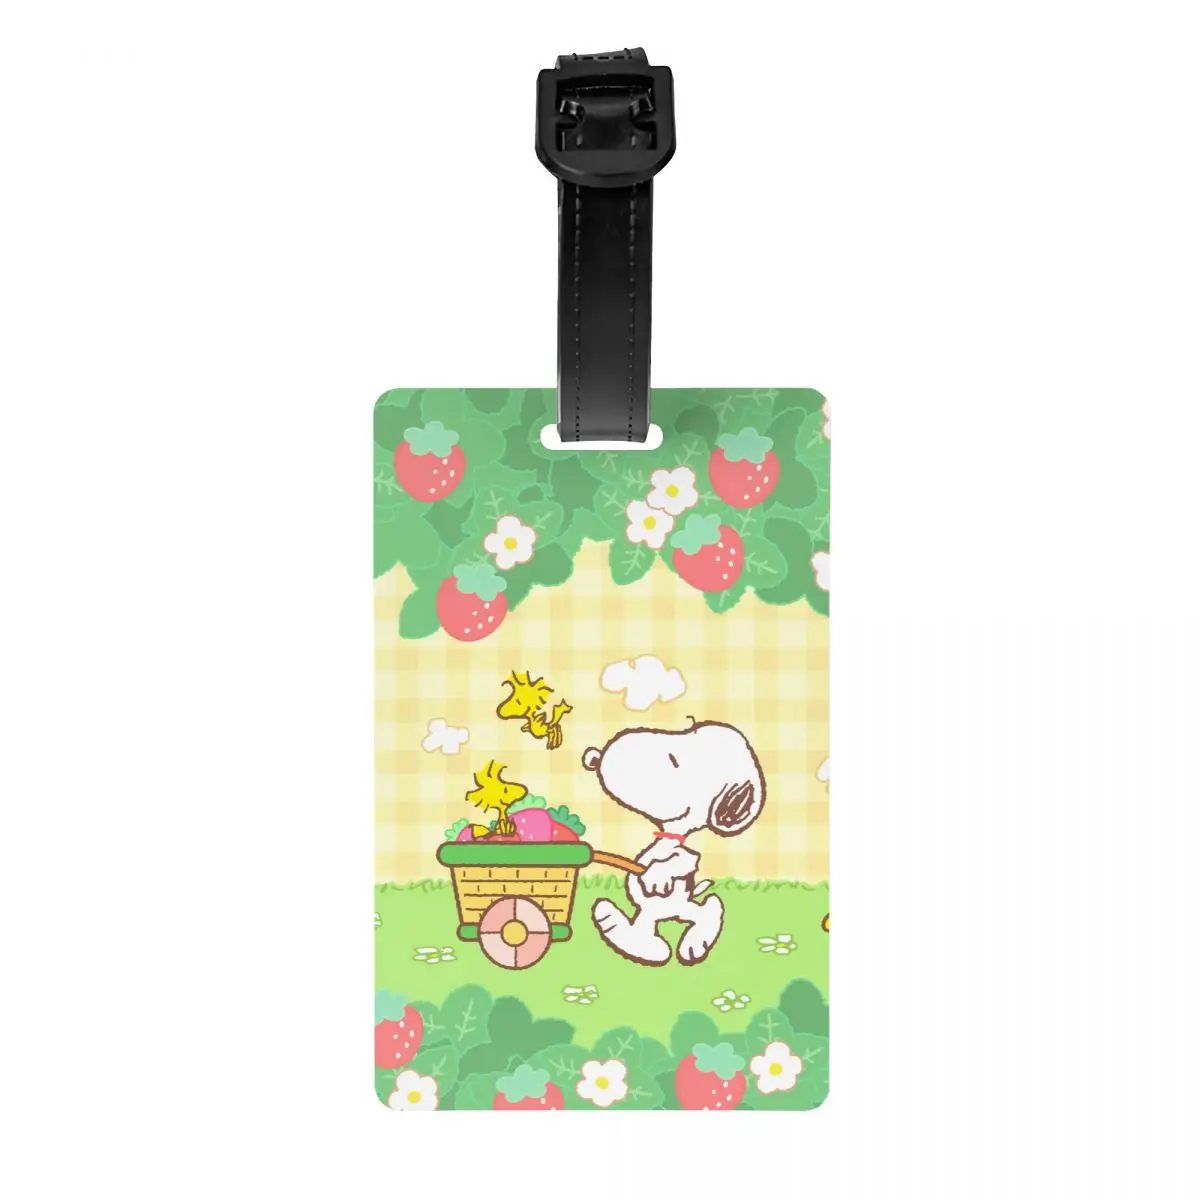 

Custom Cute Cartoon Snoopy Luggage Tag With Name Card Privacy Cover ID Label for Travel Bag Suitcase